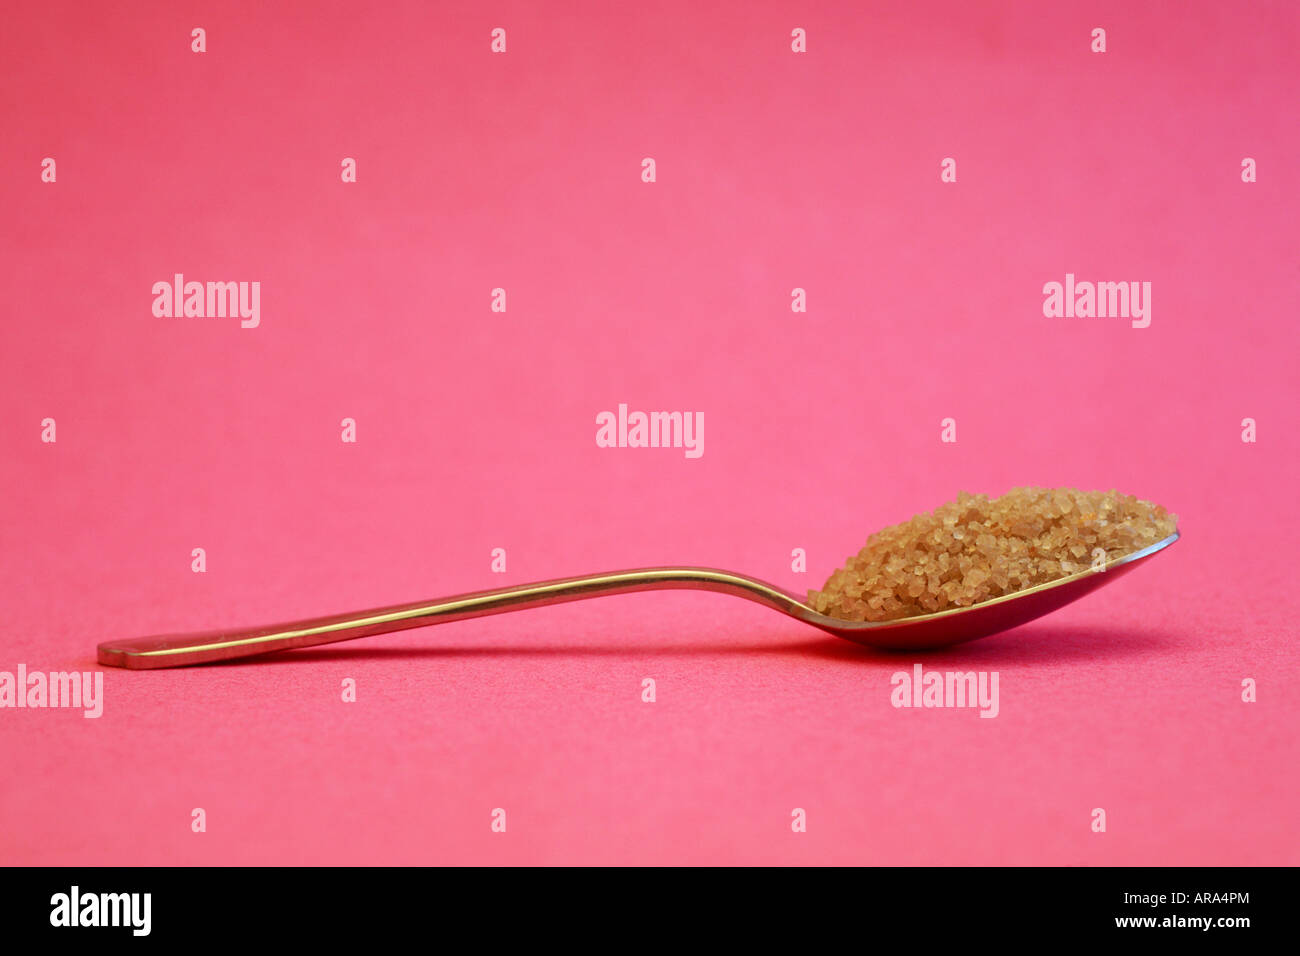 Spoonful of demerara sugar against a pink background. Stock Photo